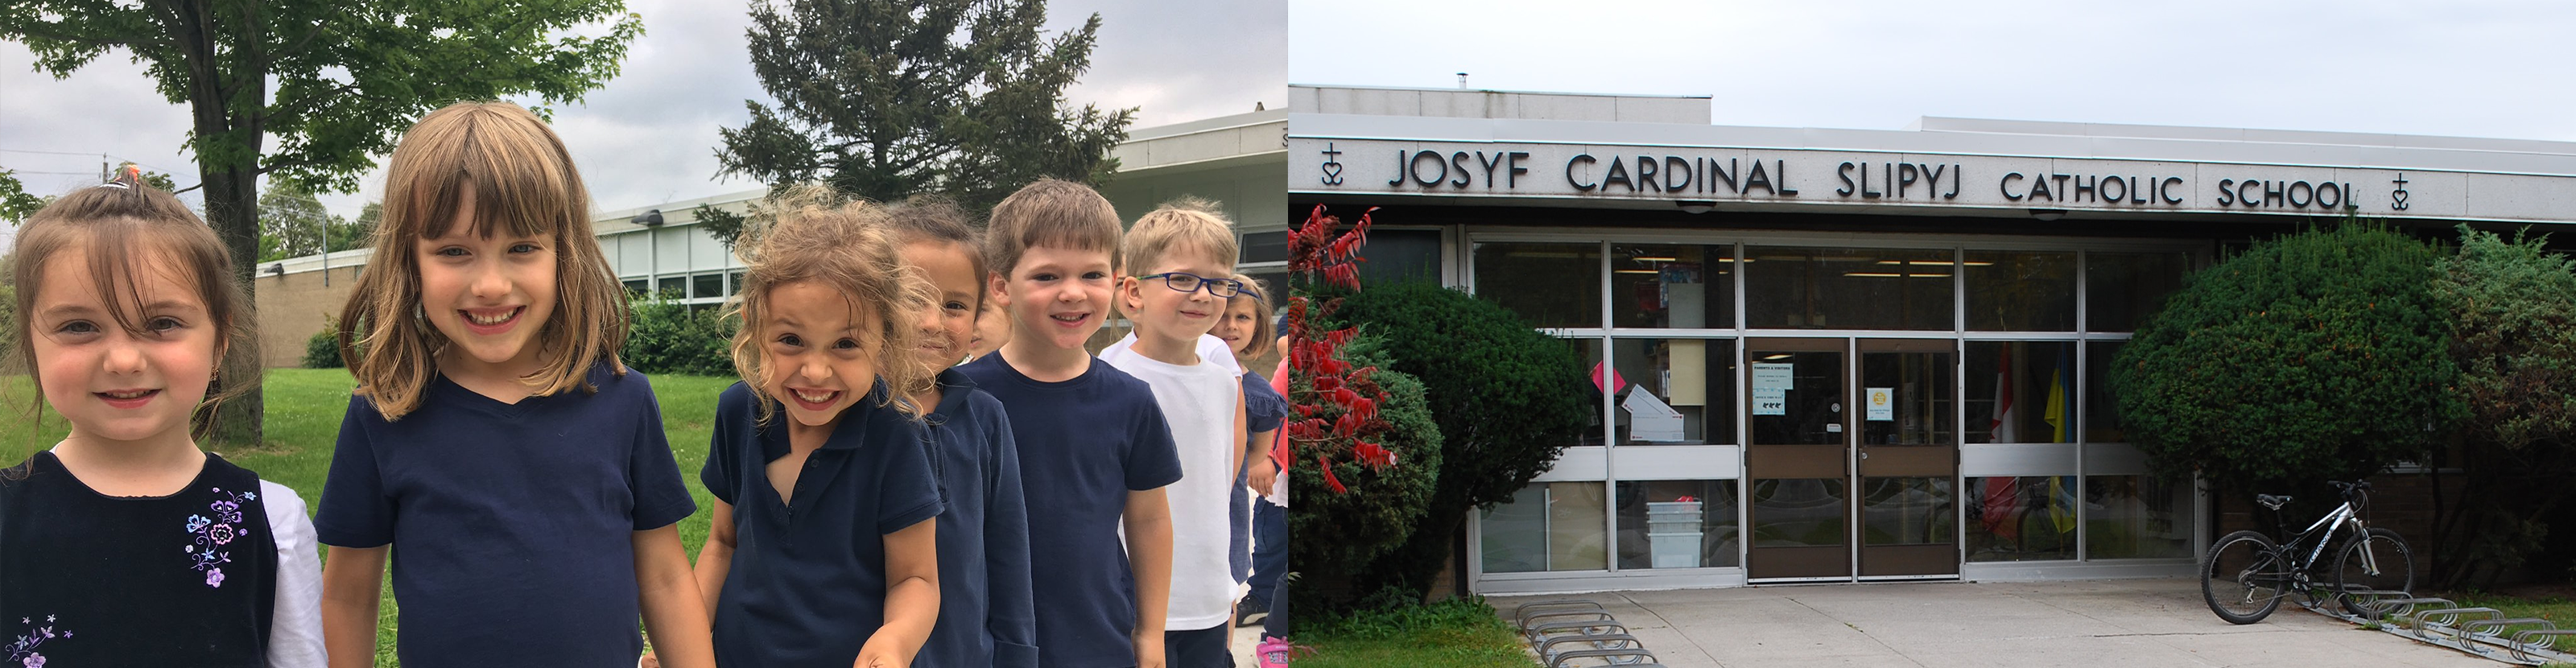 Left, students in navy and white school uniform posing together in the school grounds. Right, front of the Josyf Cardinal Slipyj school building.